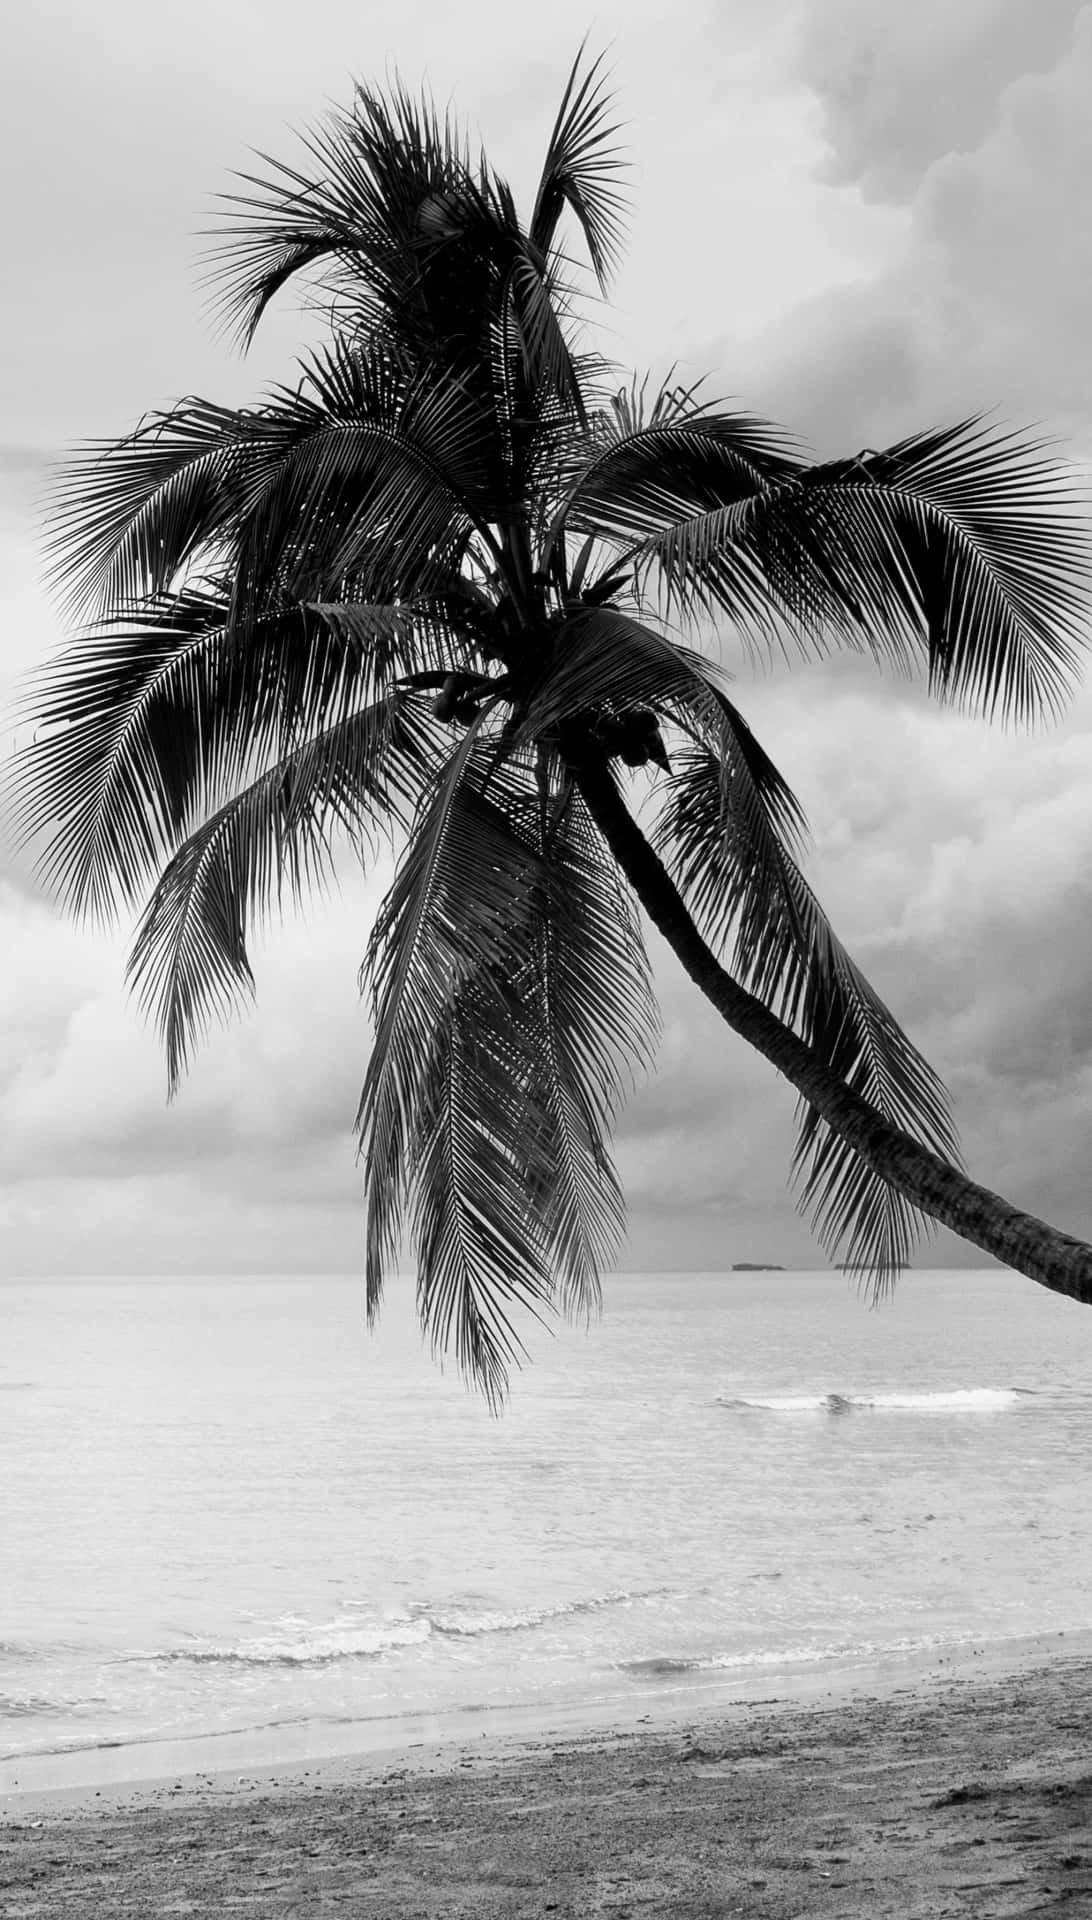 Black And White Palm Tree By The Beach Wallpaper